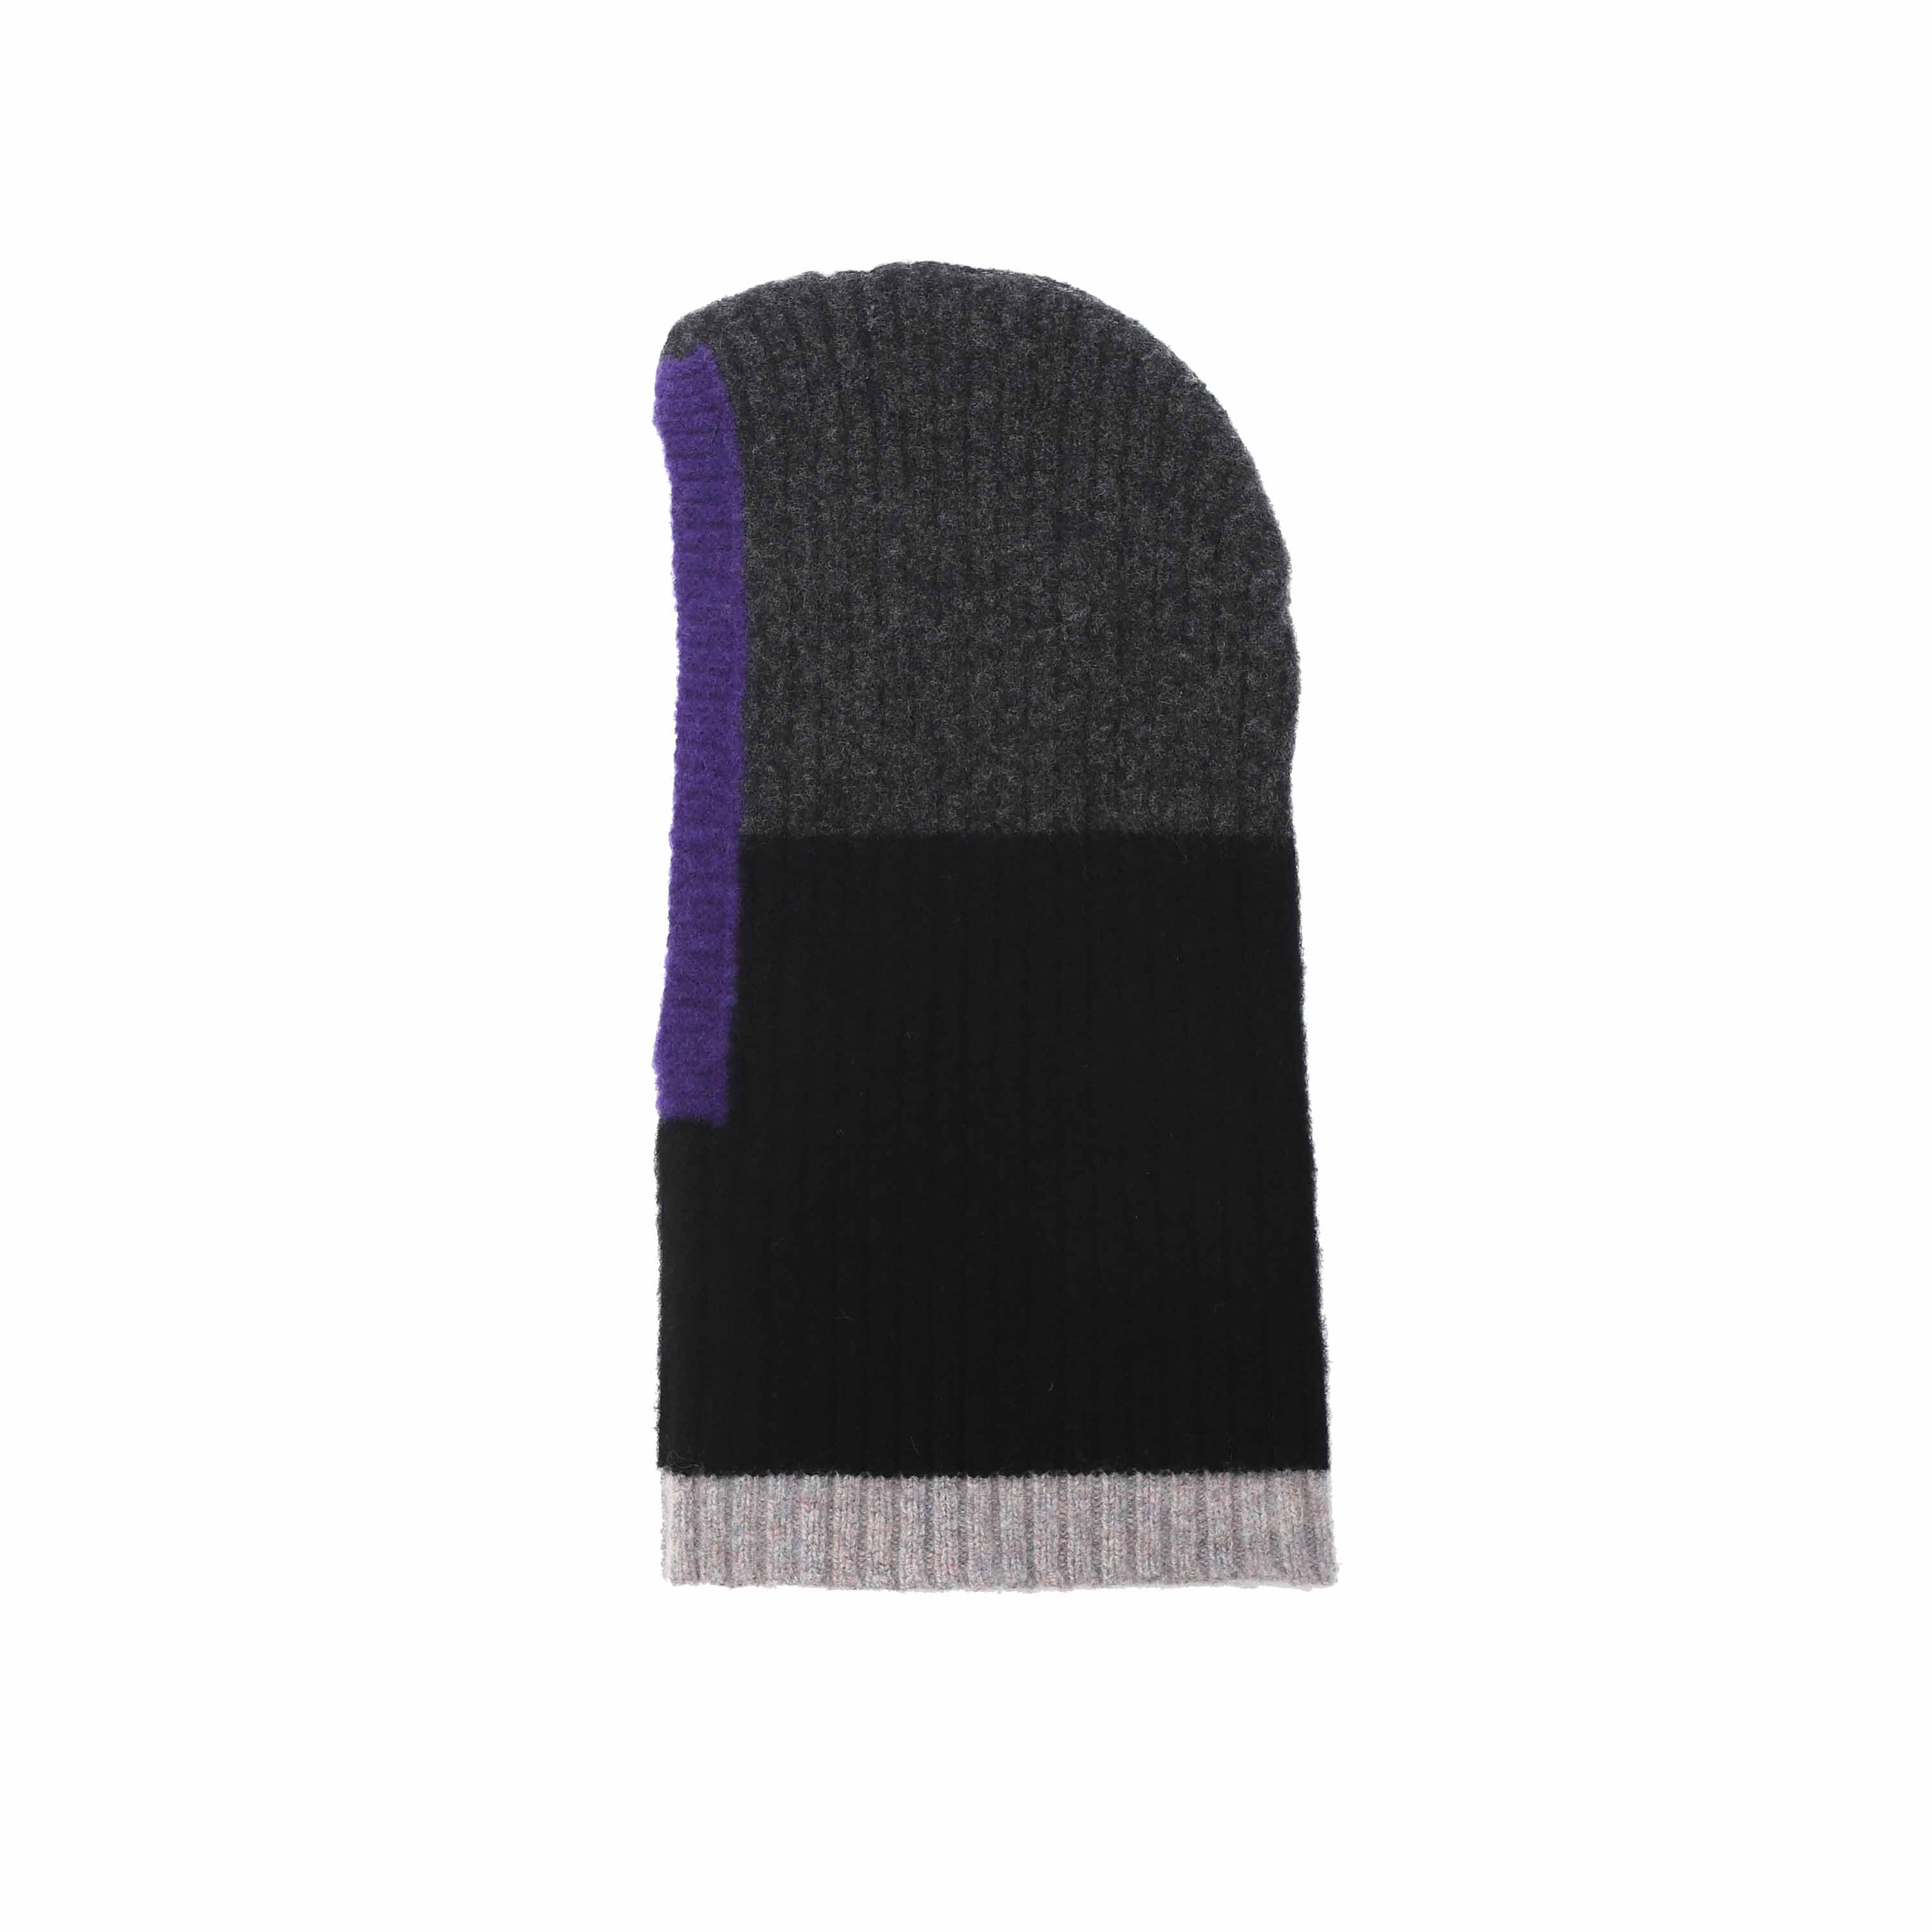 COVER IT UP HAT - BLACK